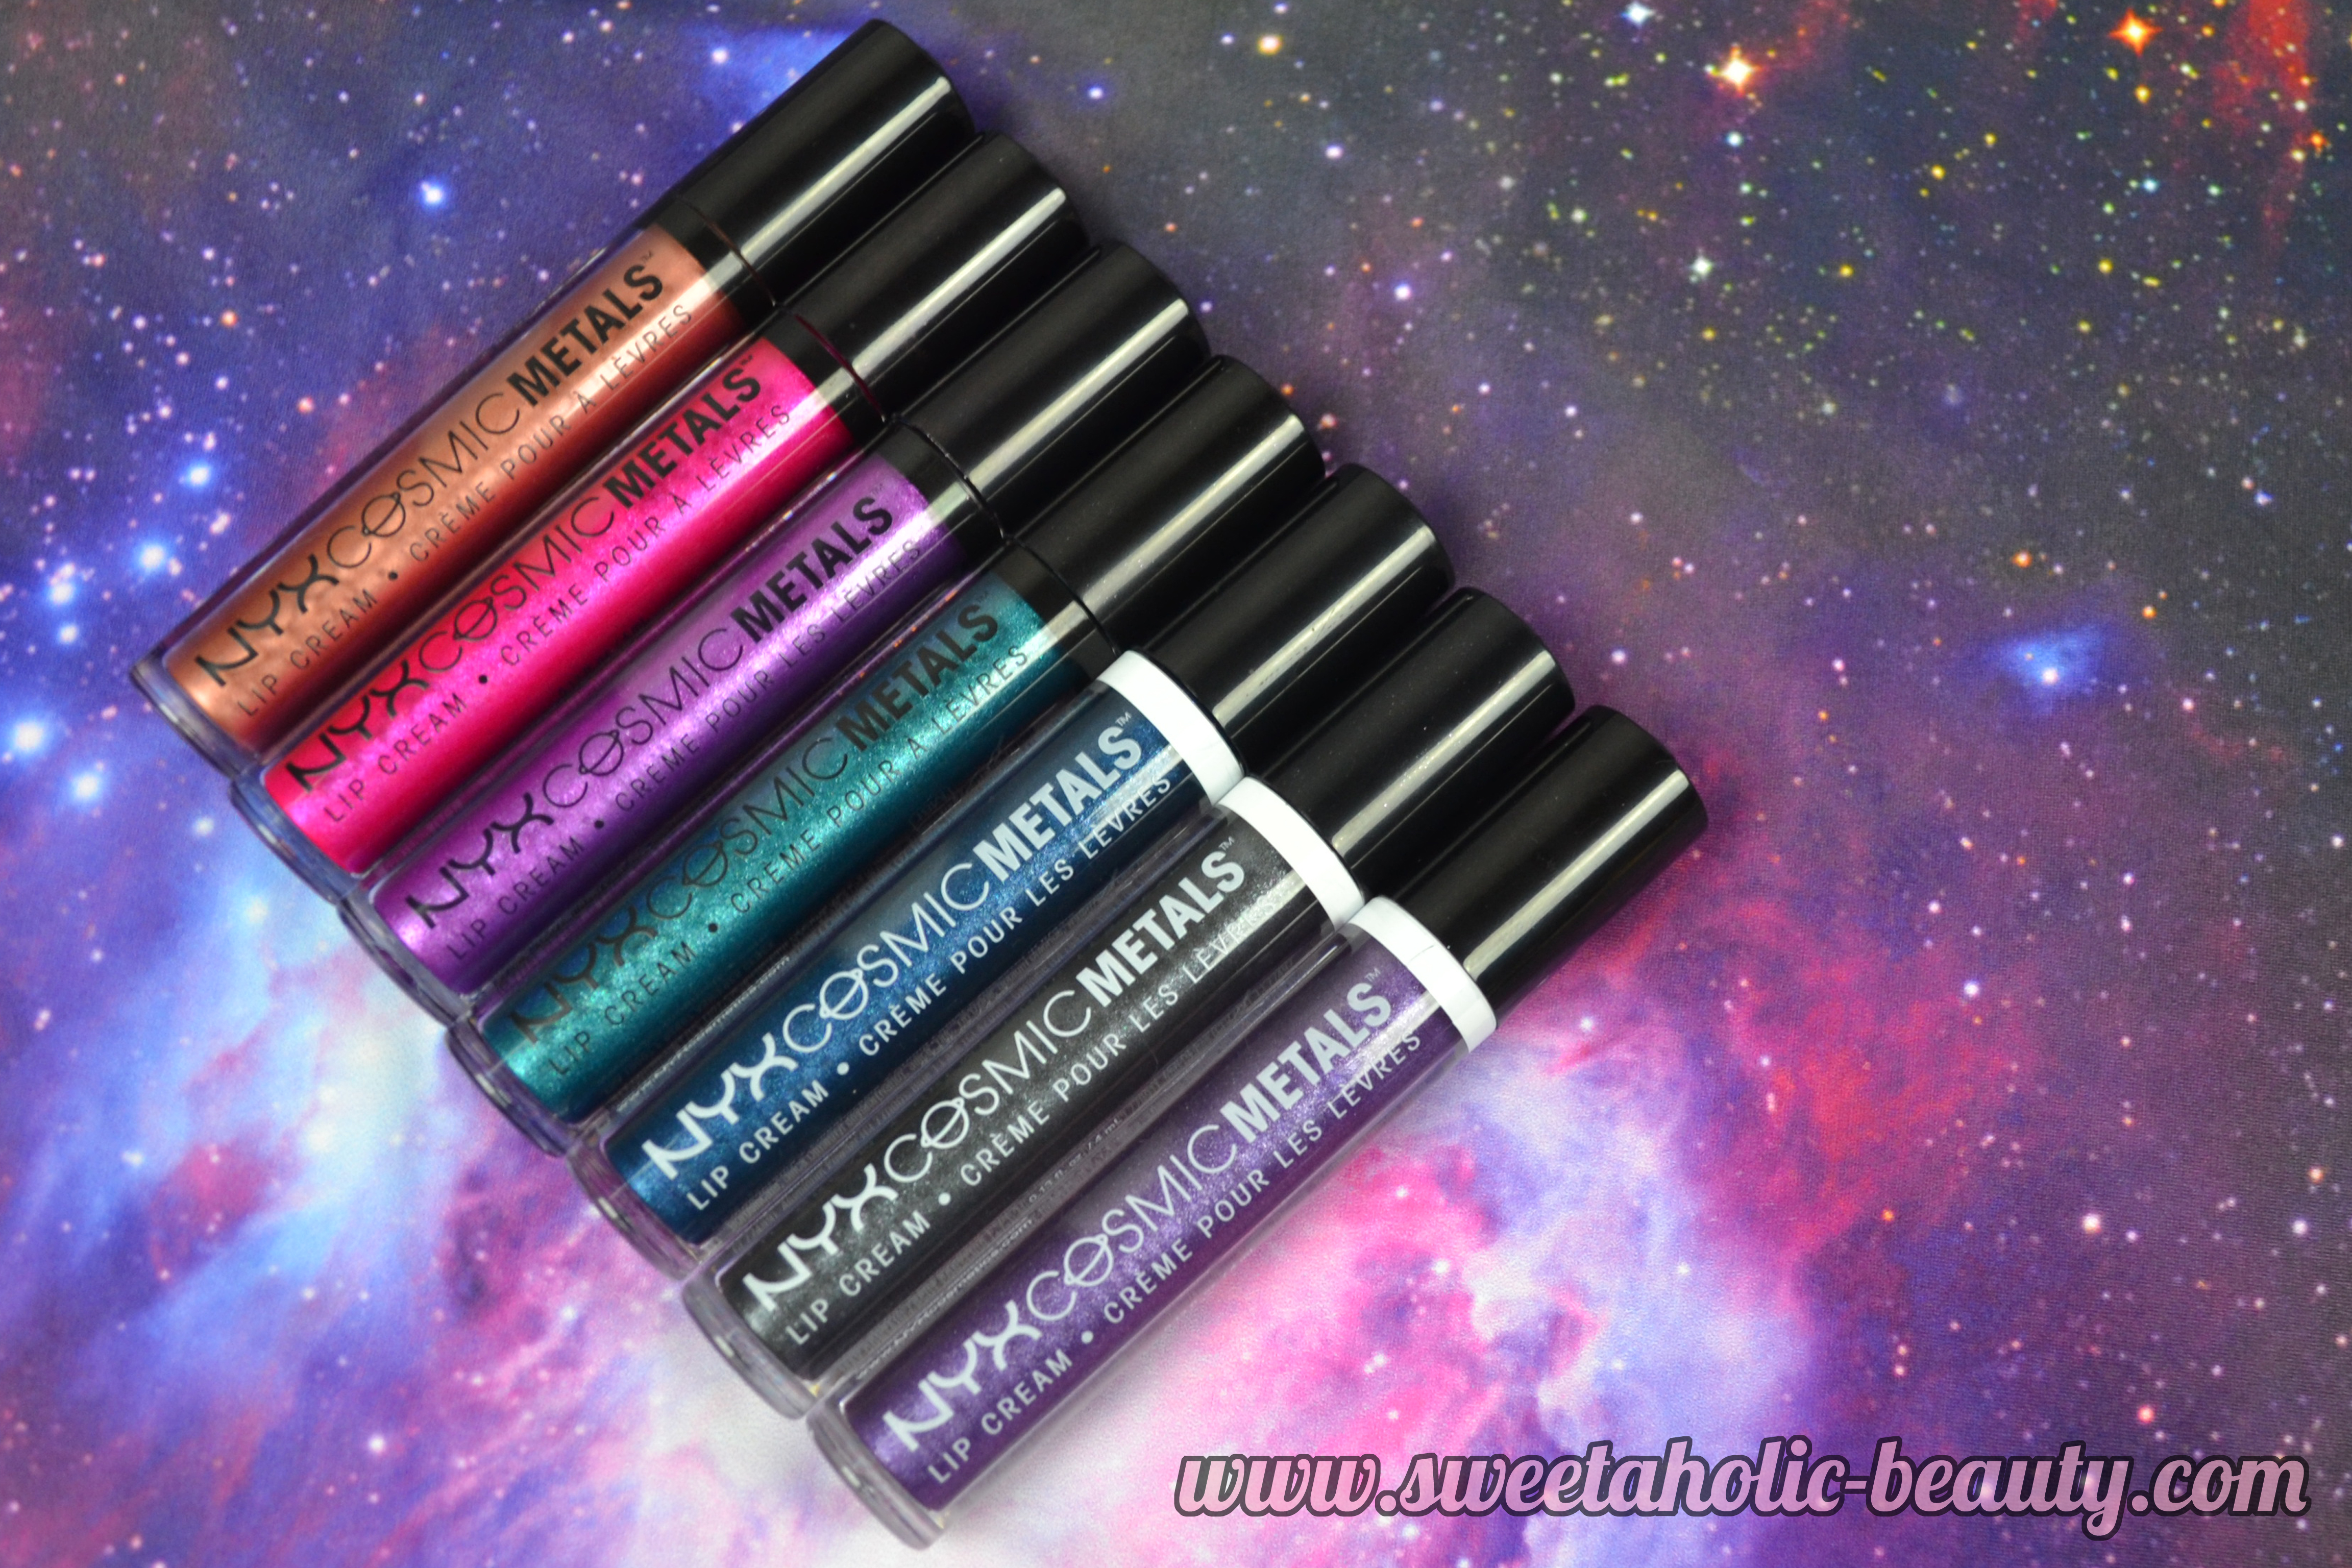 NYX Cosmetics Cosmic Metals Review & Swatches - Sweetaholic Beauty